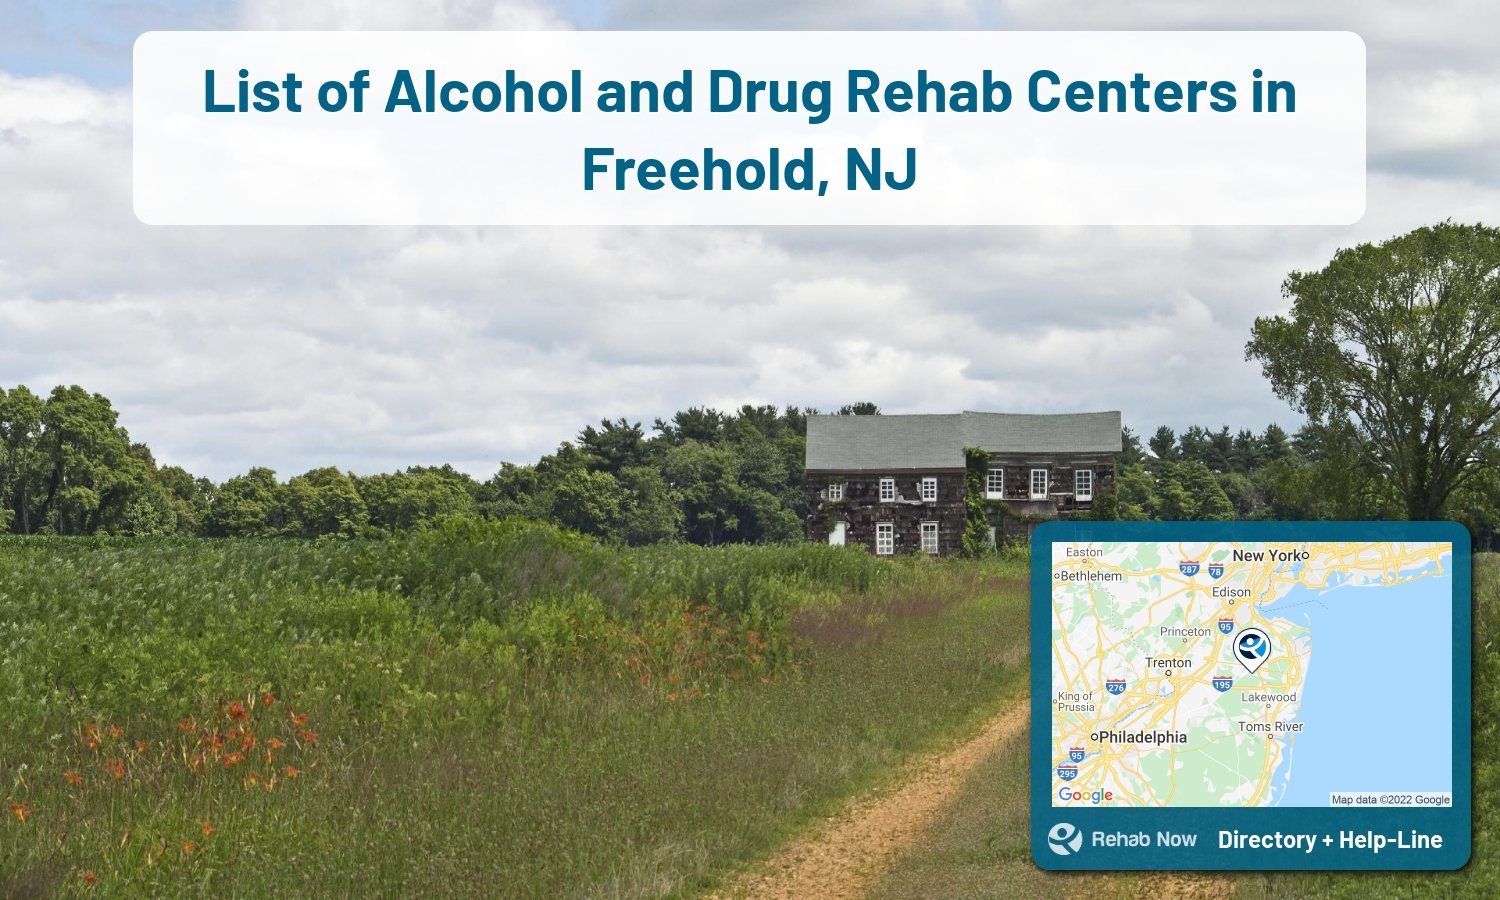 Easily find the top Rehab Centers in Freehold, NJ. We researched hard to pick the best alcohol and drug rehab centers in New Jersey.